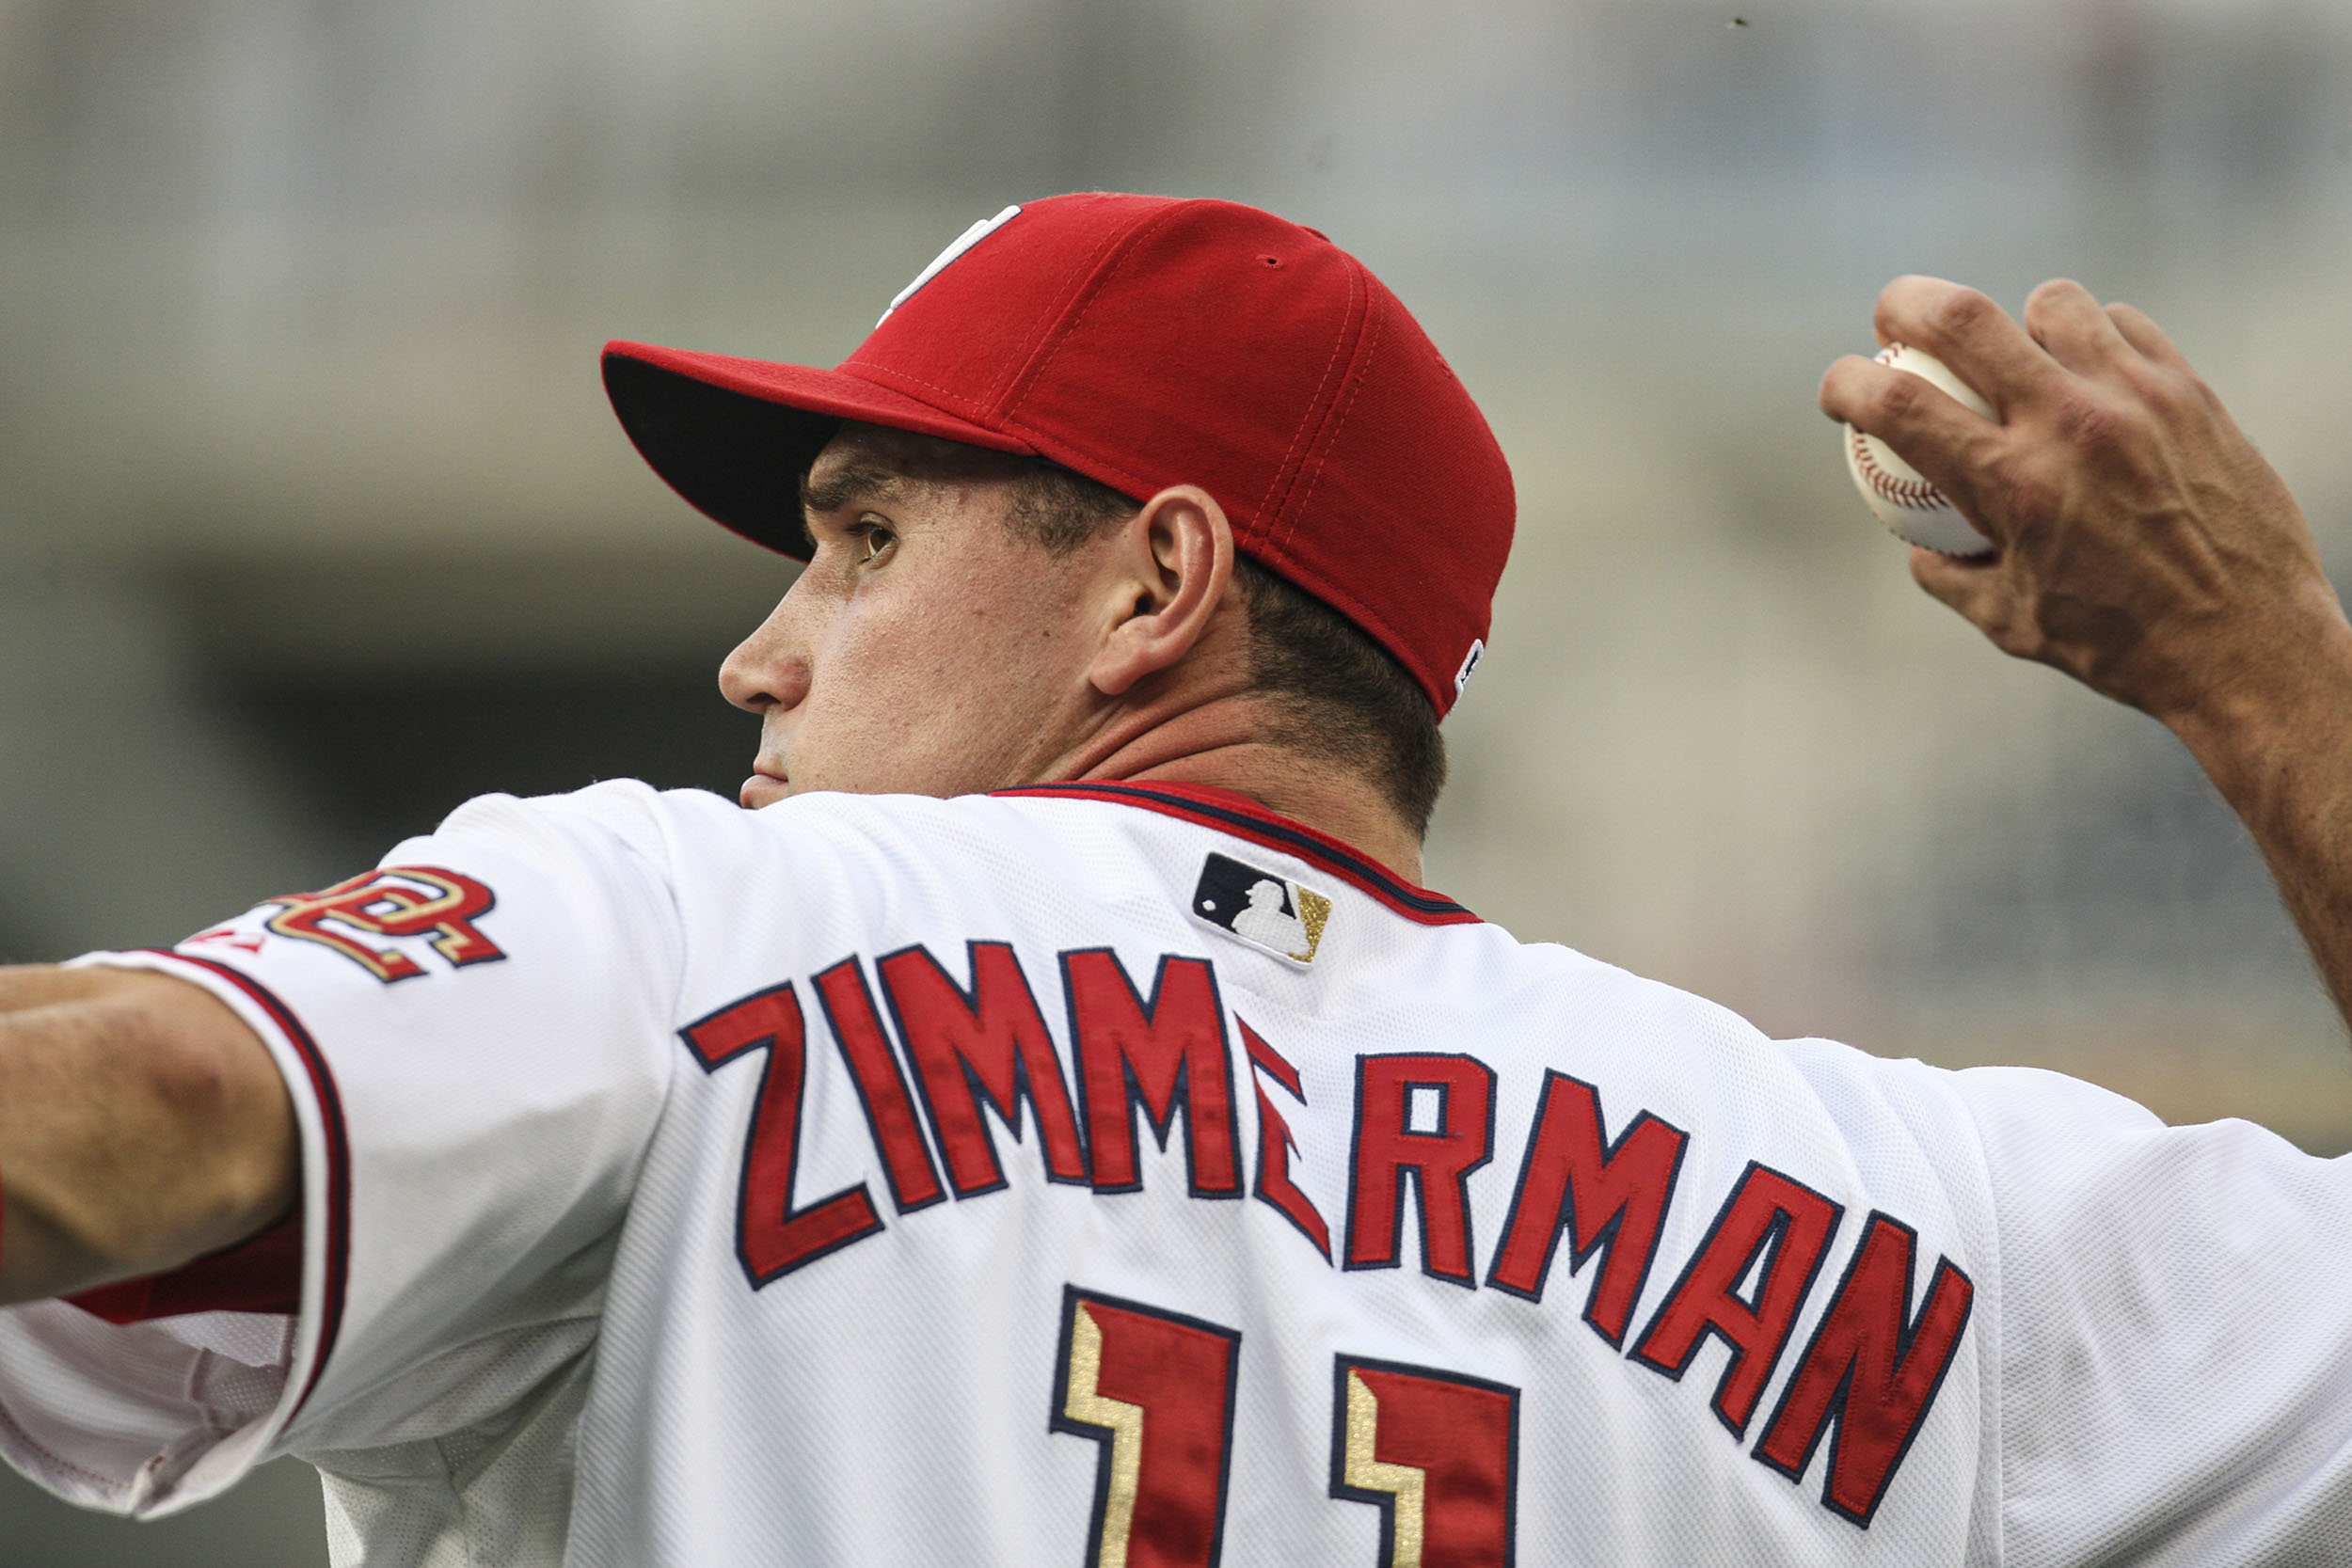 UVA Baseball Coach Brian O'Connor Says Ryan Zimmerman Was a One of a Kind